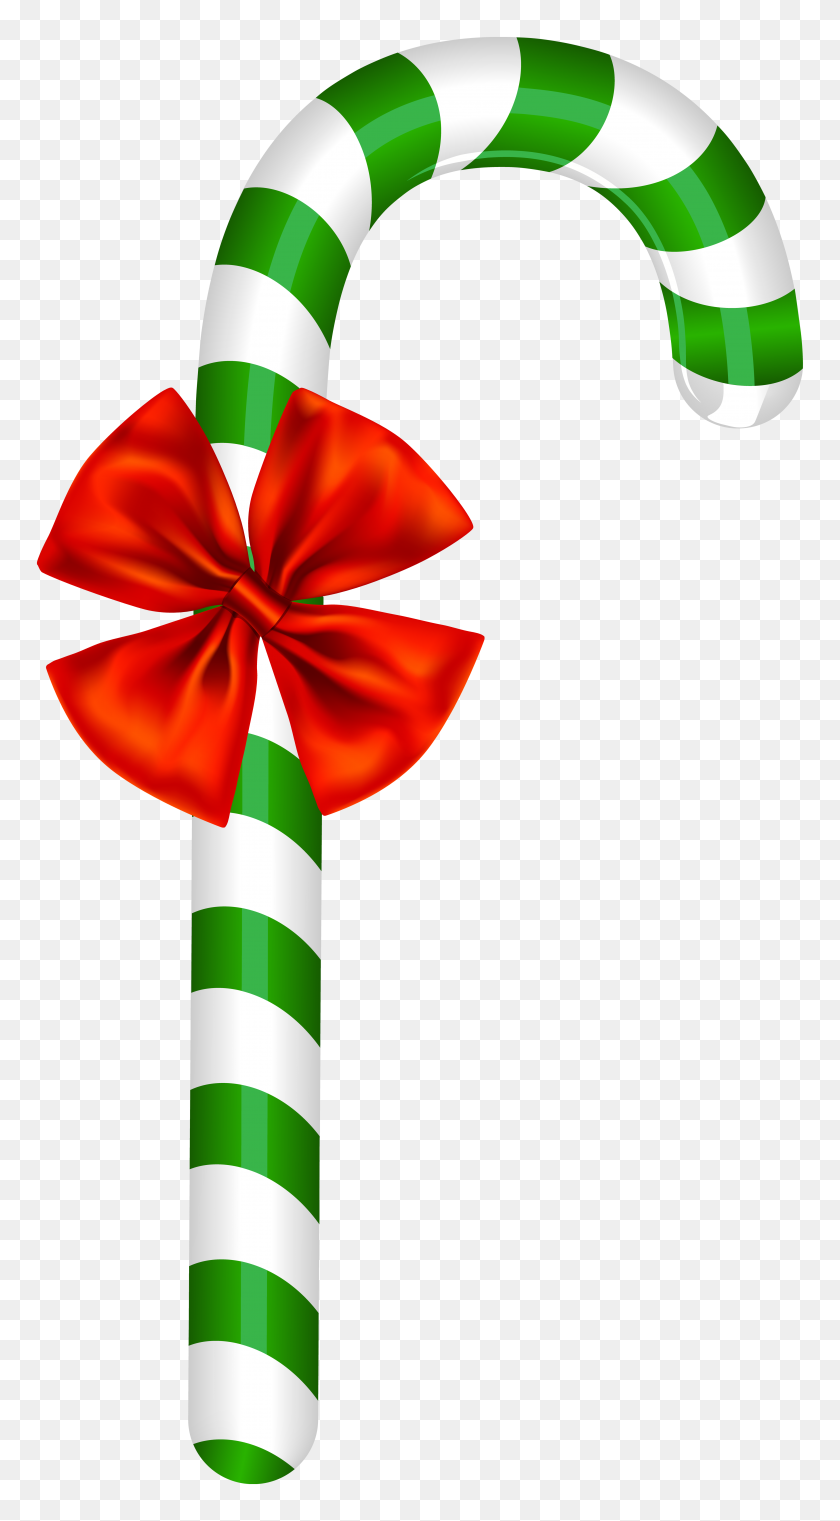 4271x8000 Peppermint Candy Cane Clip Art - Peppermint Candy PNG